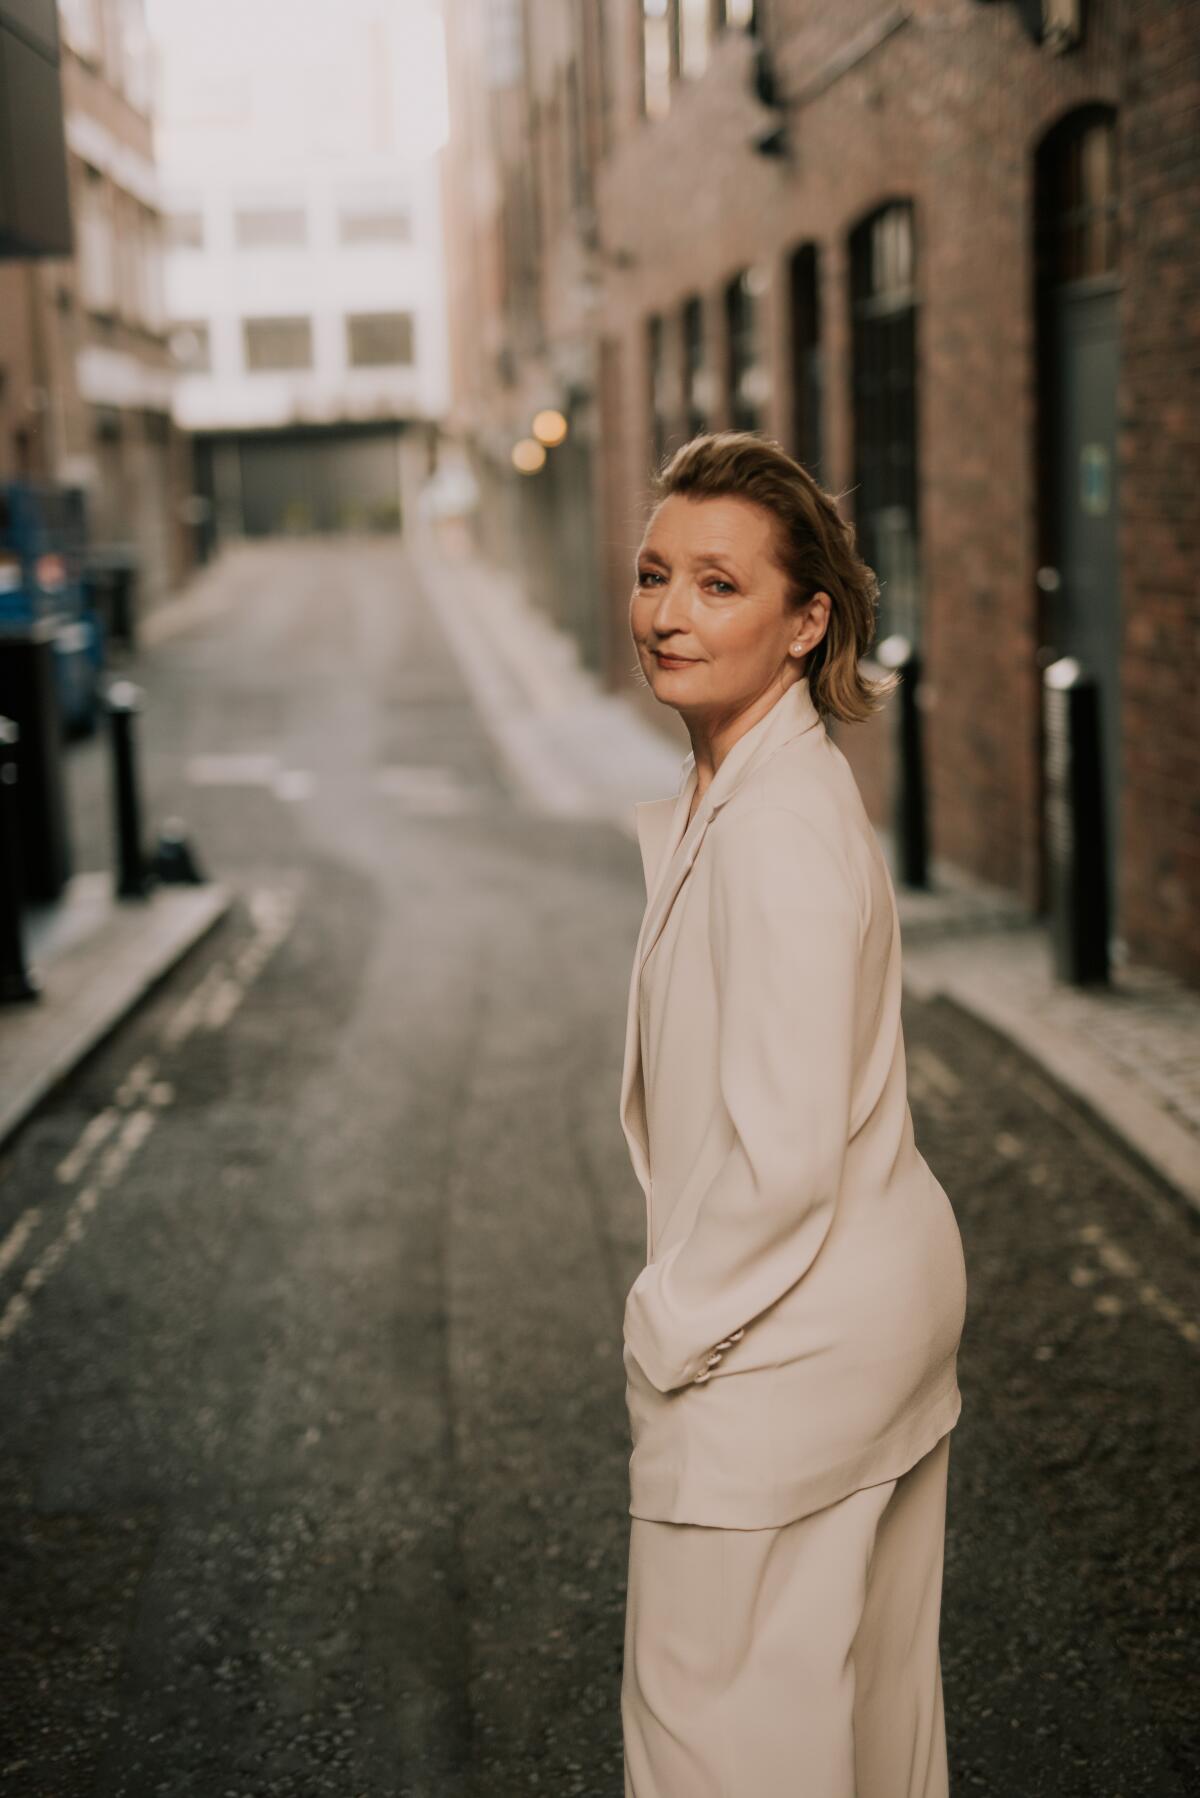 Oscar nominated actress Lesley Manville